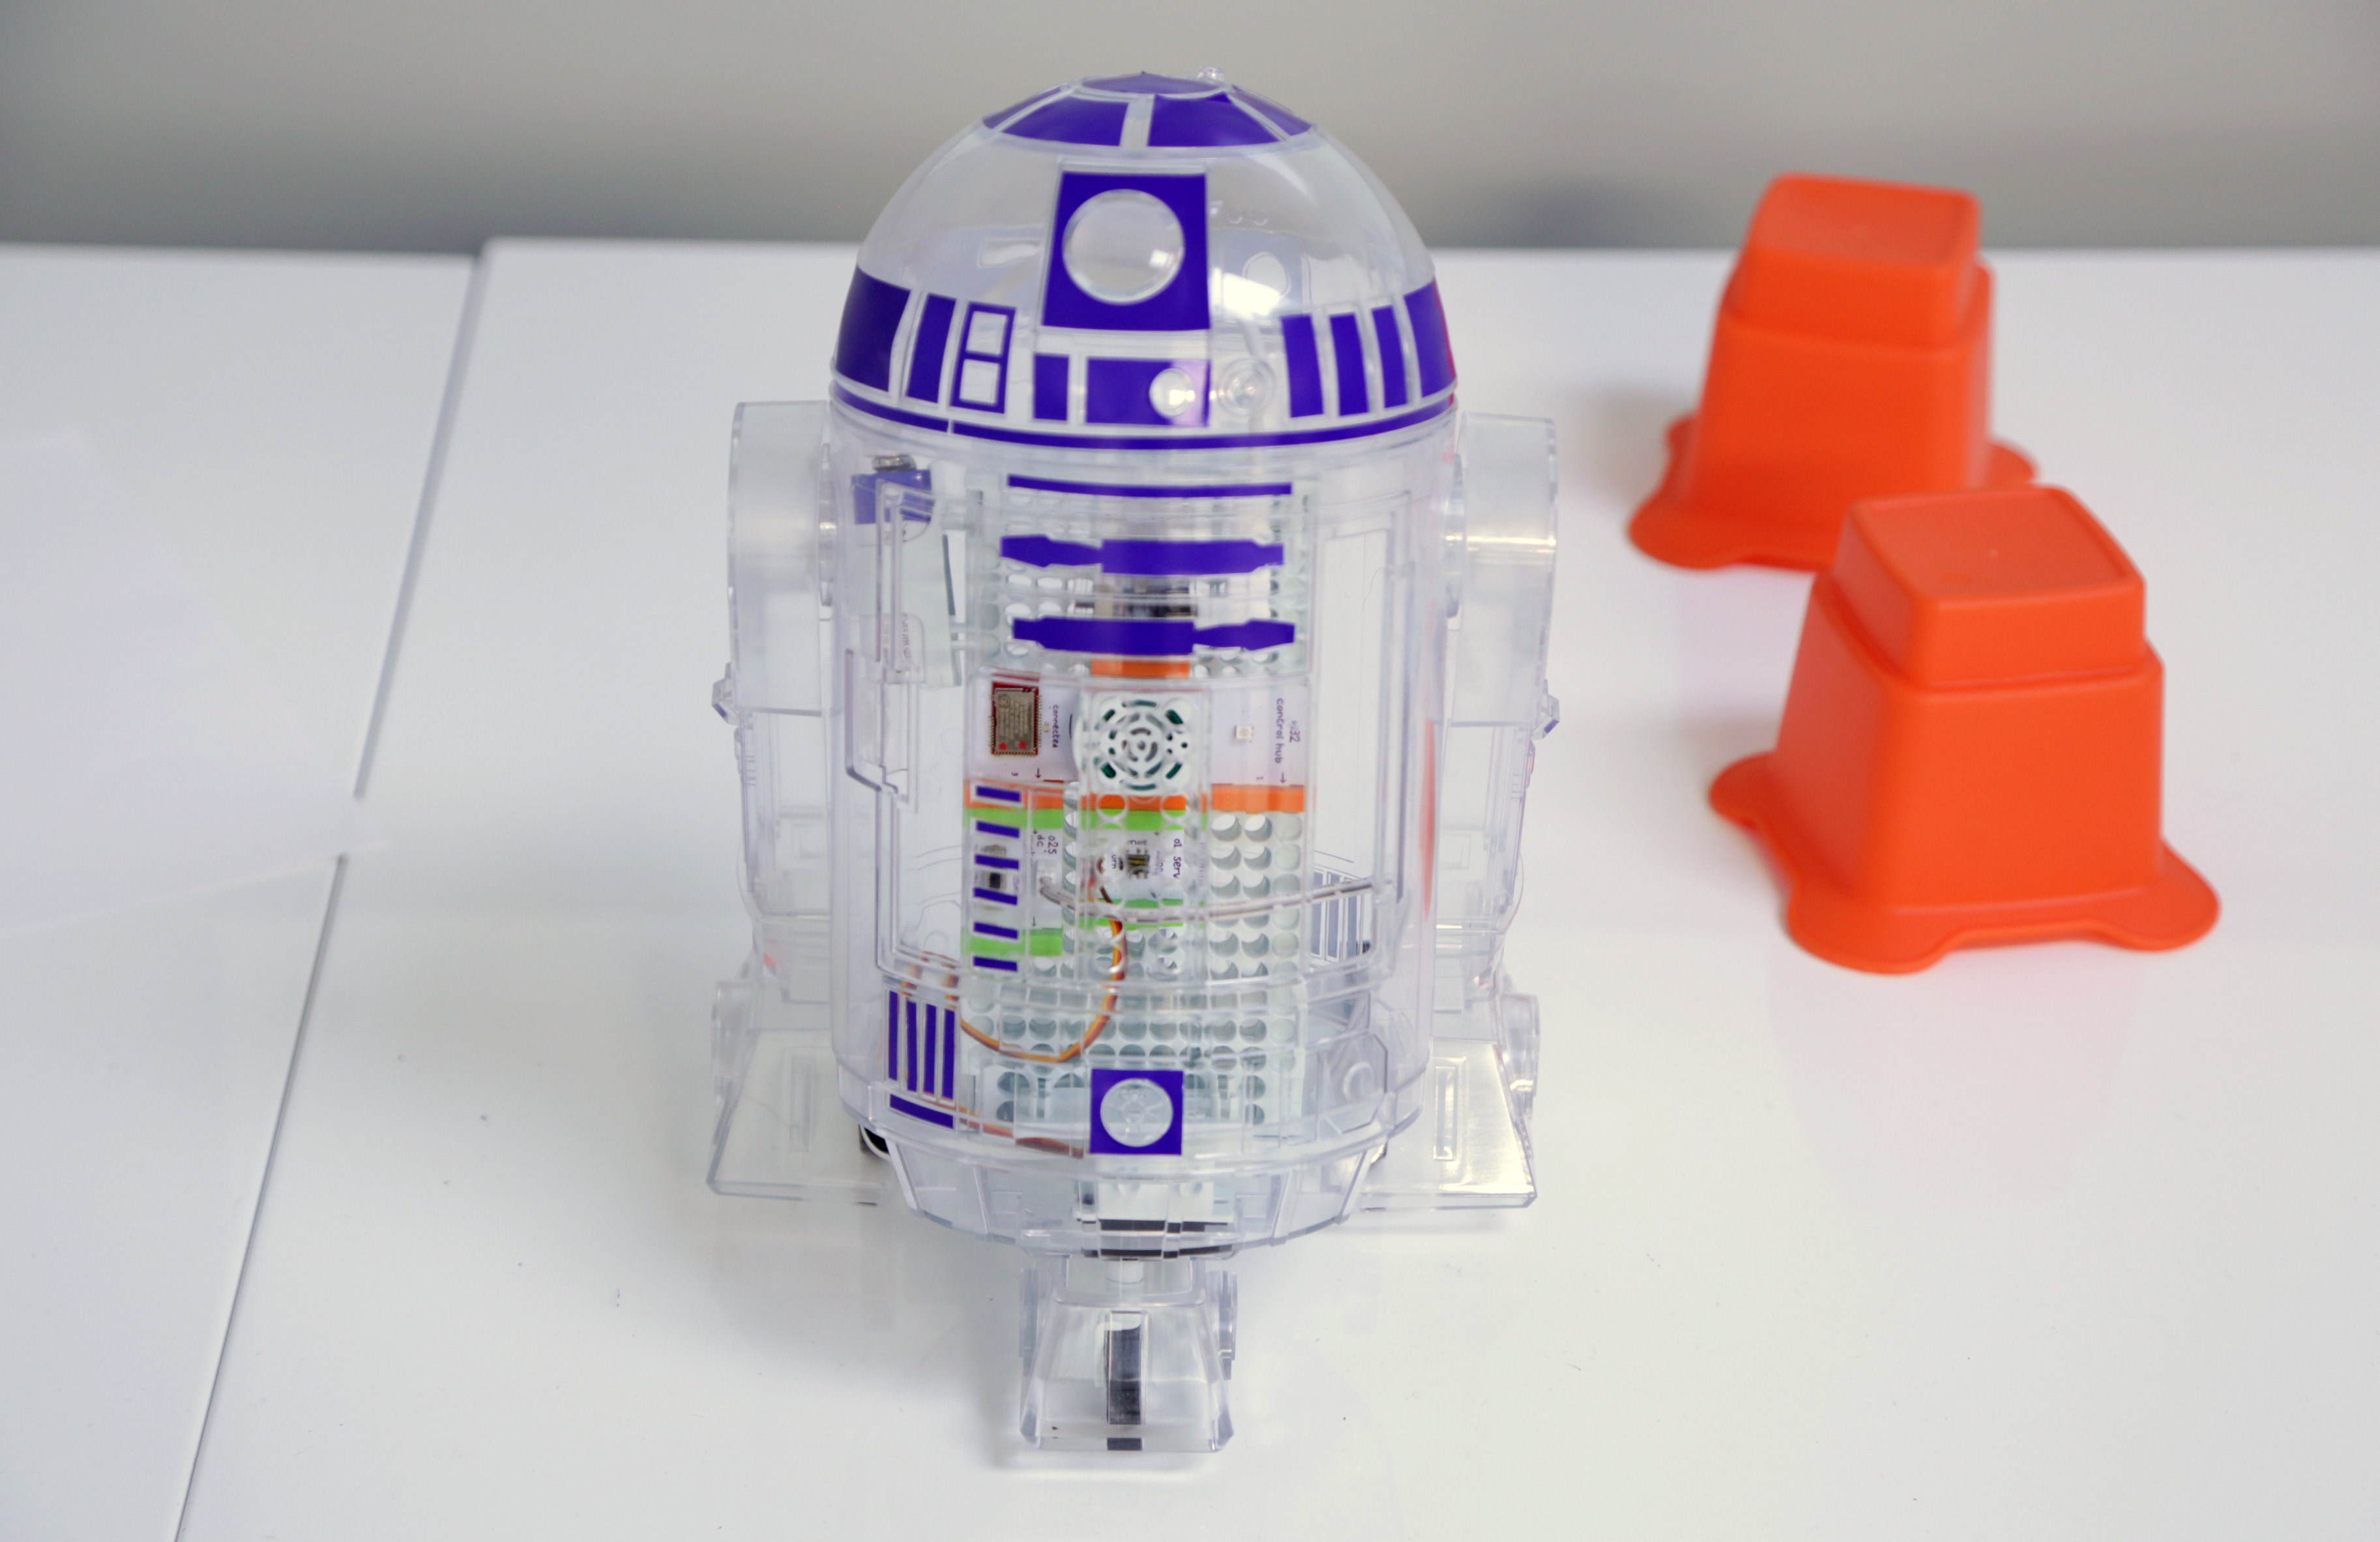 How littleBits grew from side project to Star Wars